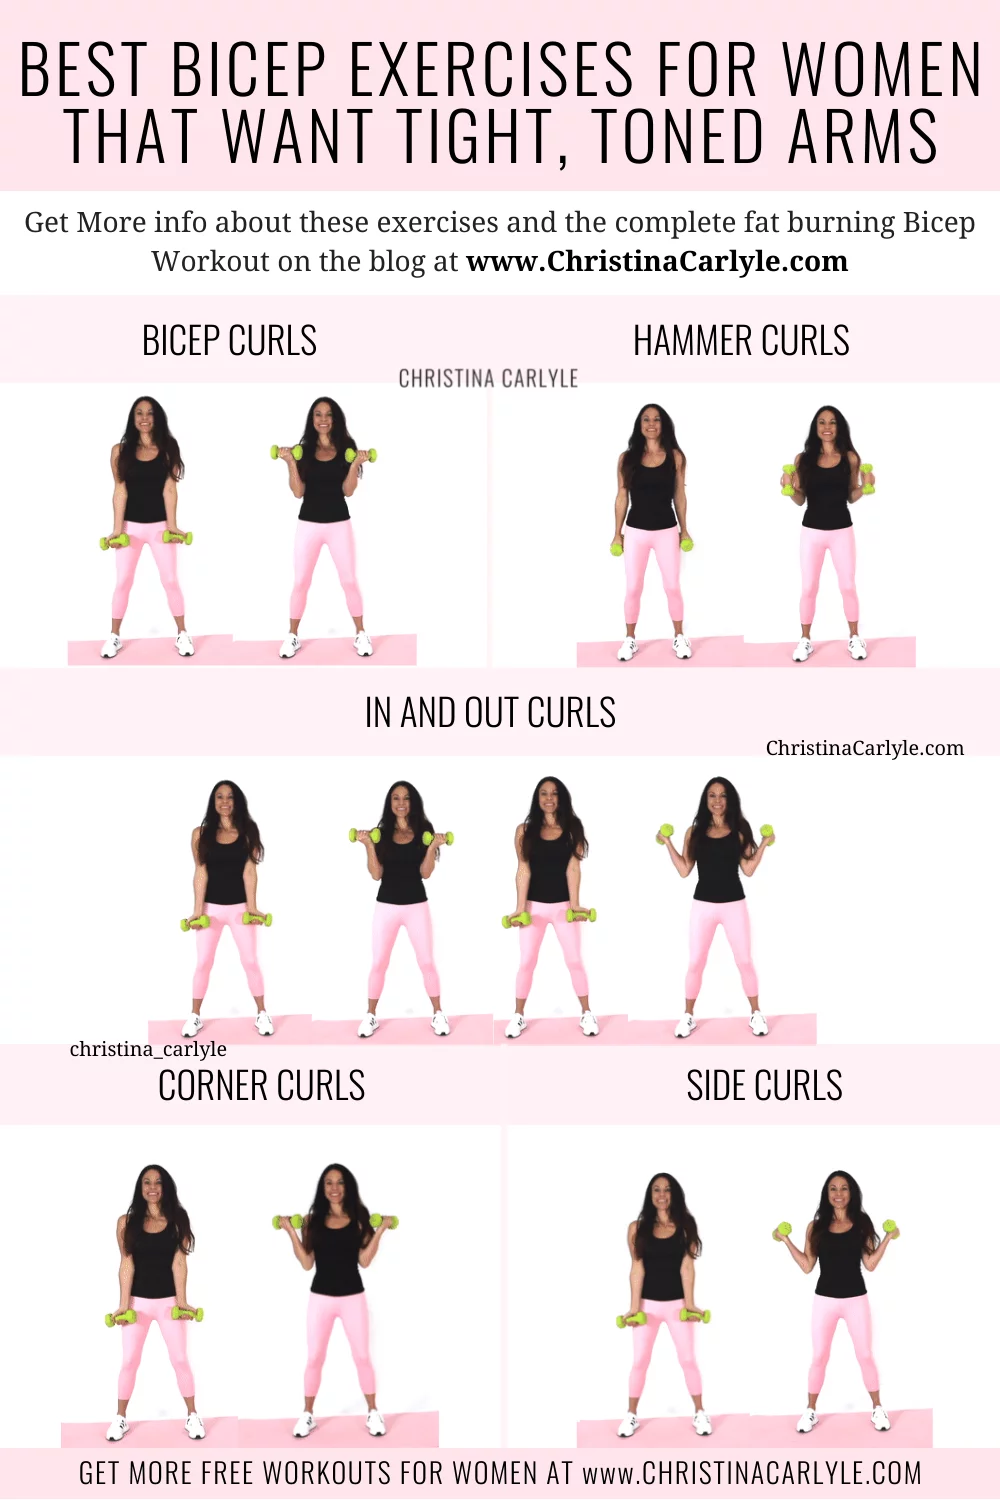  5 Bicep Exercises being done by Trainer Christina Carlyle in a bicep workout for women and text that says The Best Bicep Exercises for Women